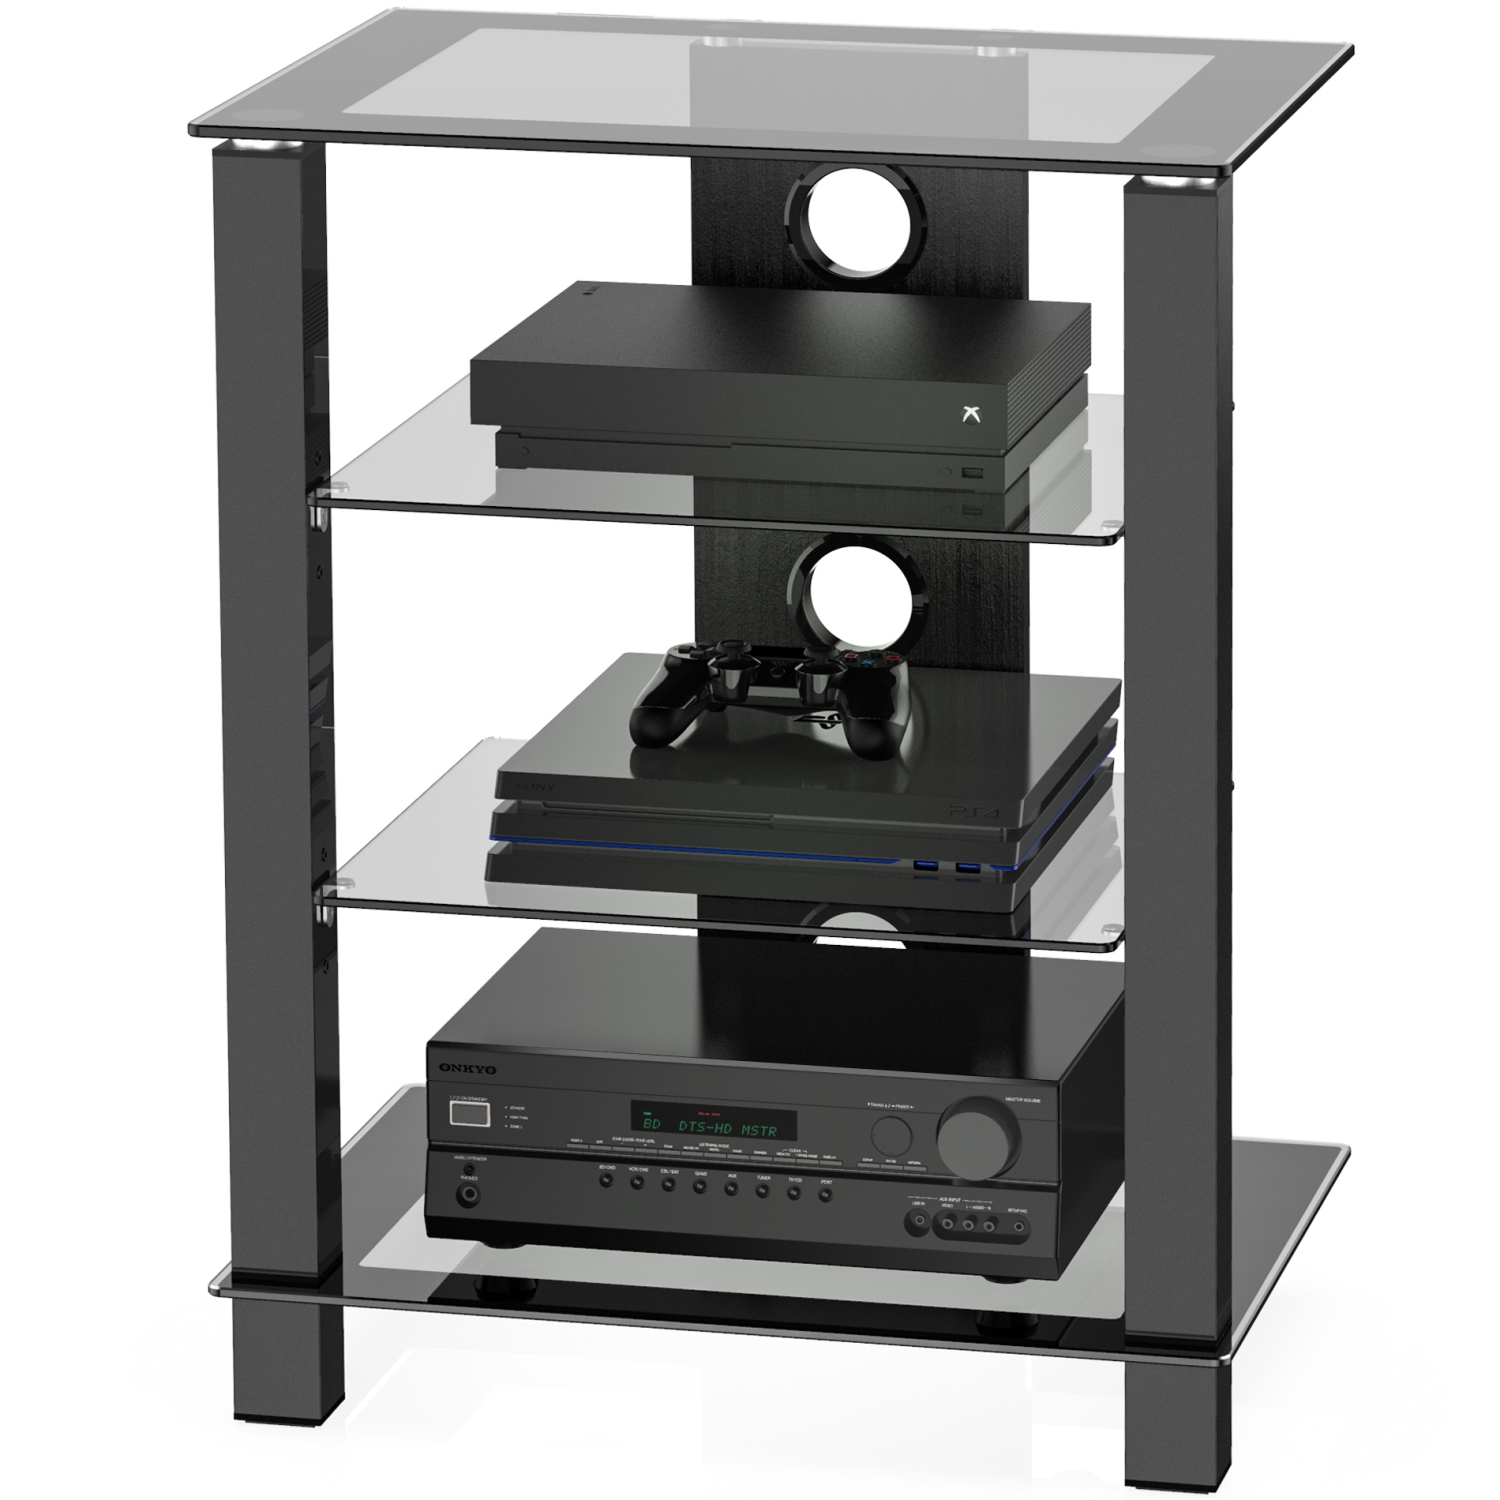 FITUEYES TV Stand 4 Tier TV Cabinet for Home Theater / TV / Xbox One / PS4 / Receiver / Sound Bar / Game Console with Cable Management